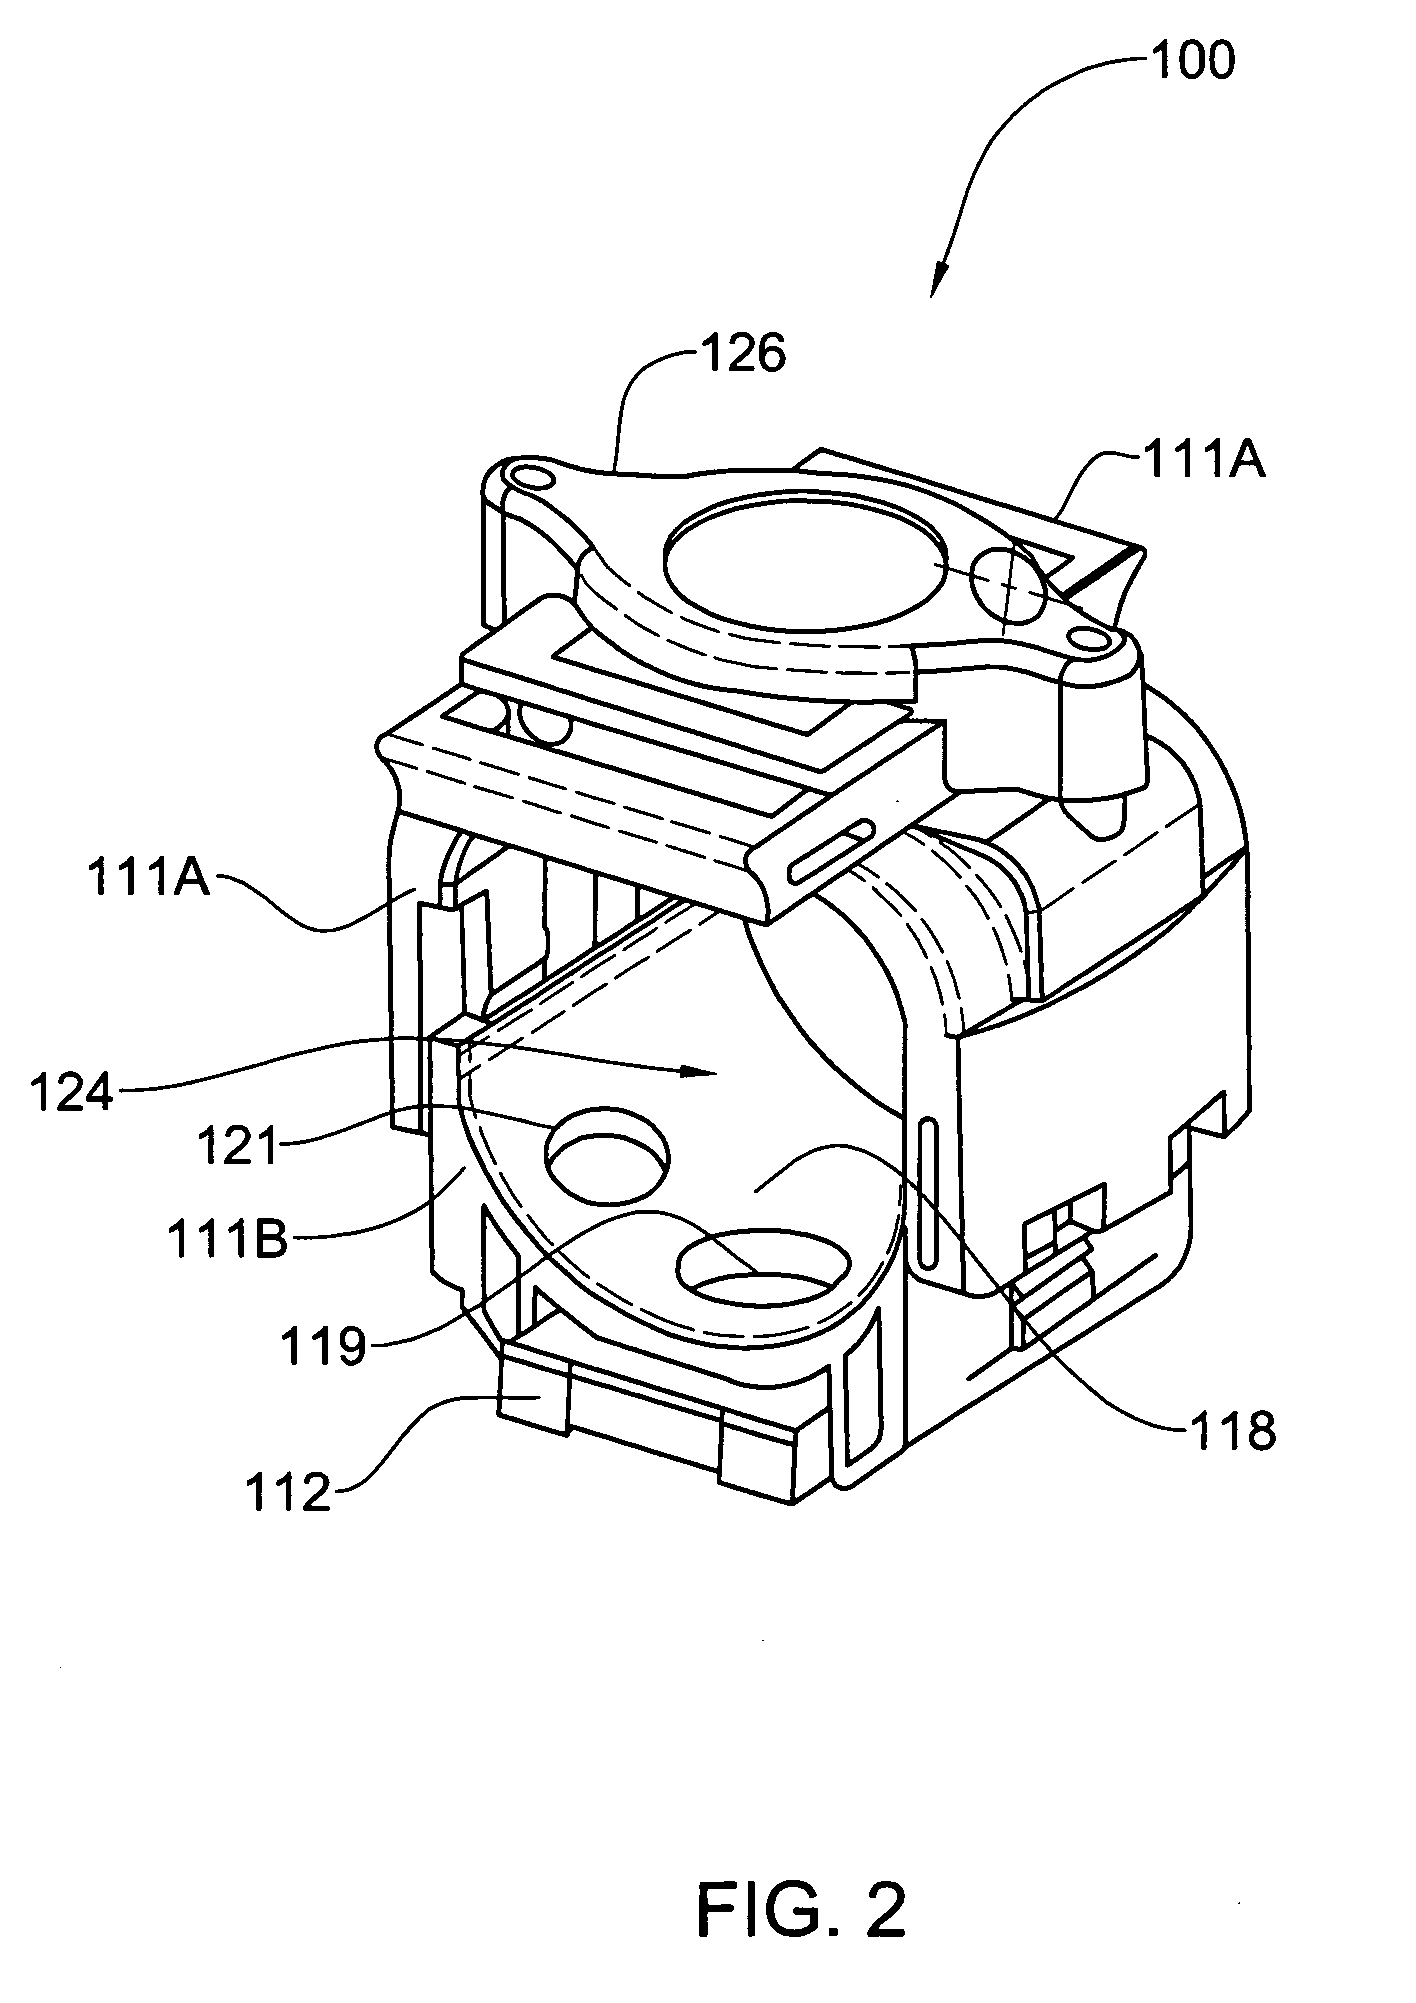 Device and method for non-invasive optical measurements